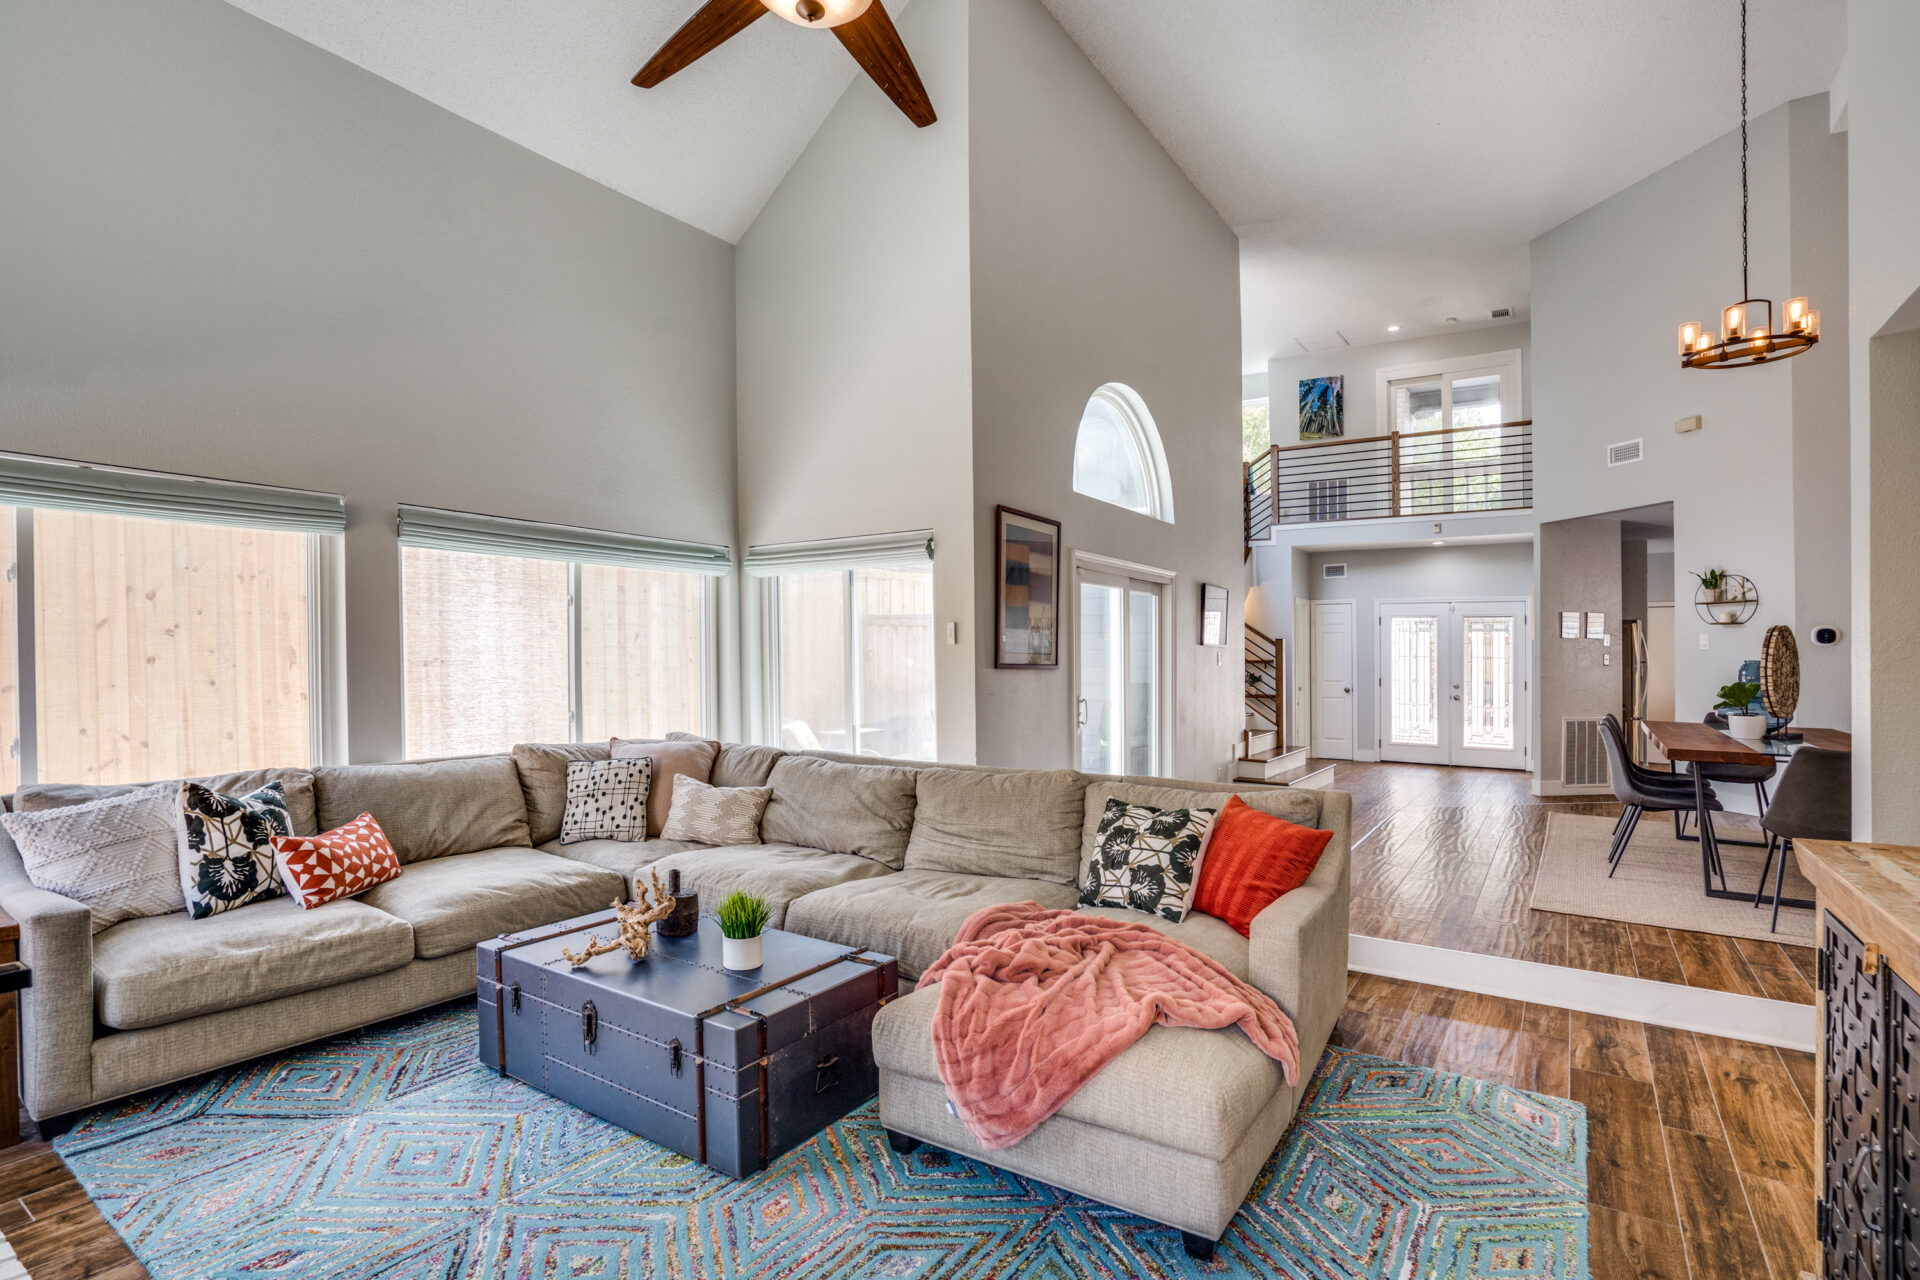 3837-canot-ln-addison-tx-75001-High-Res-3